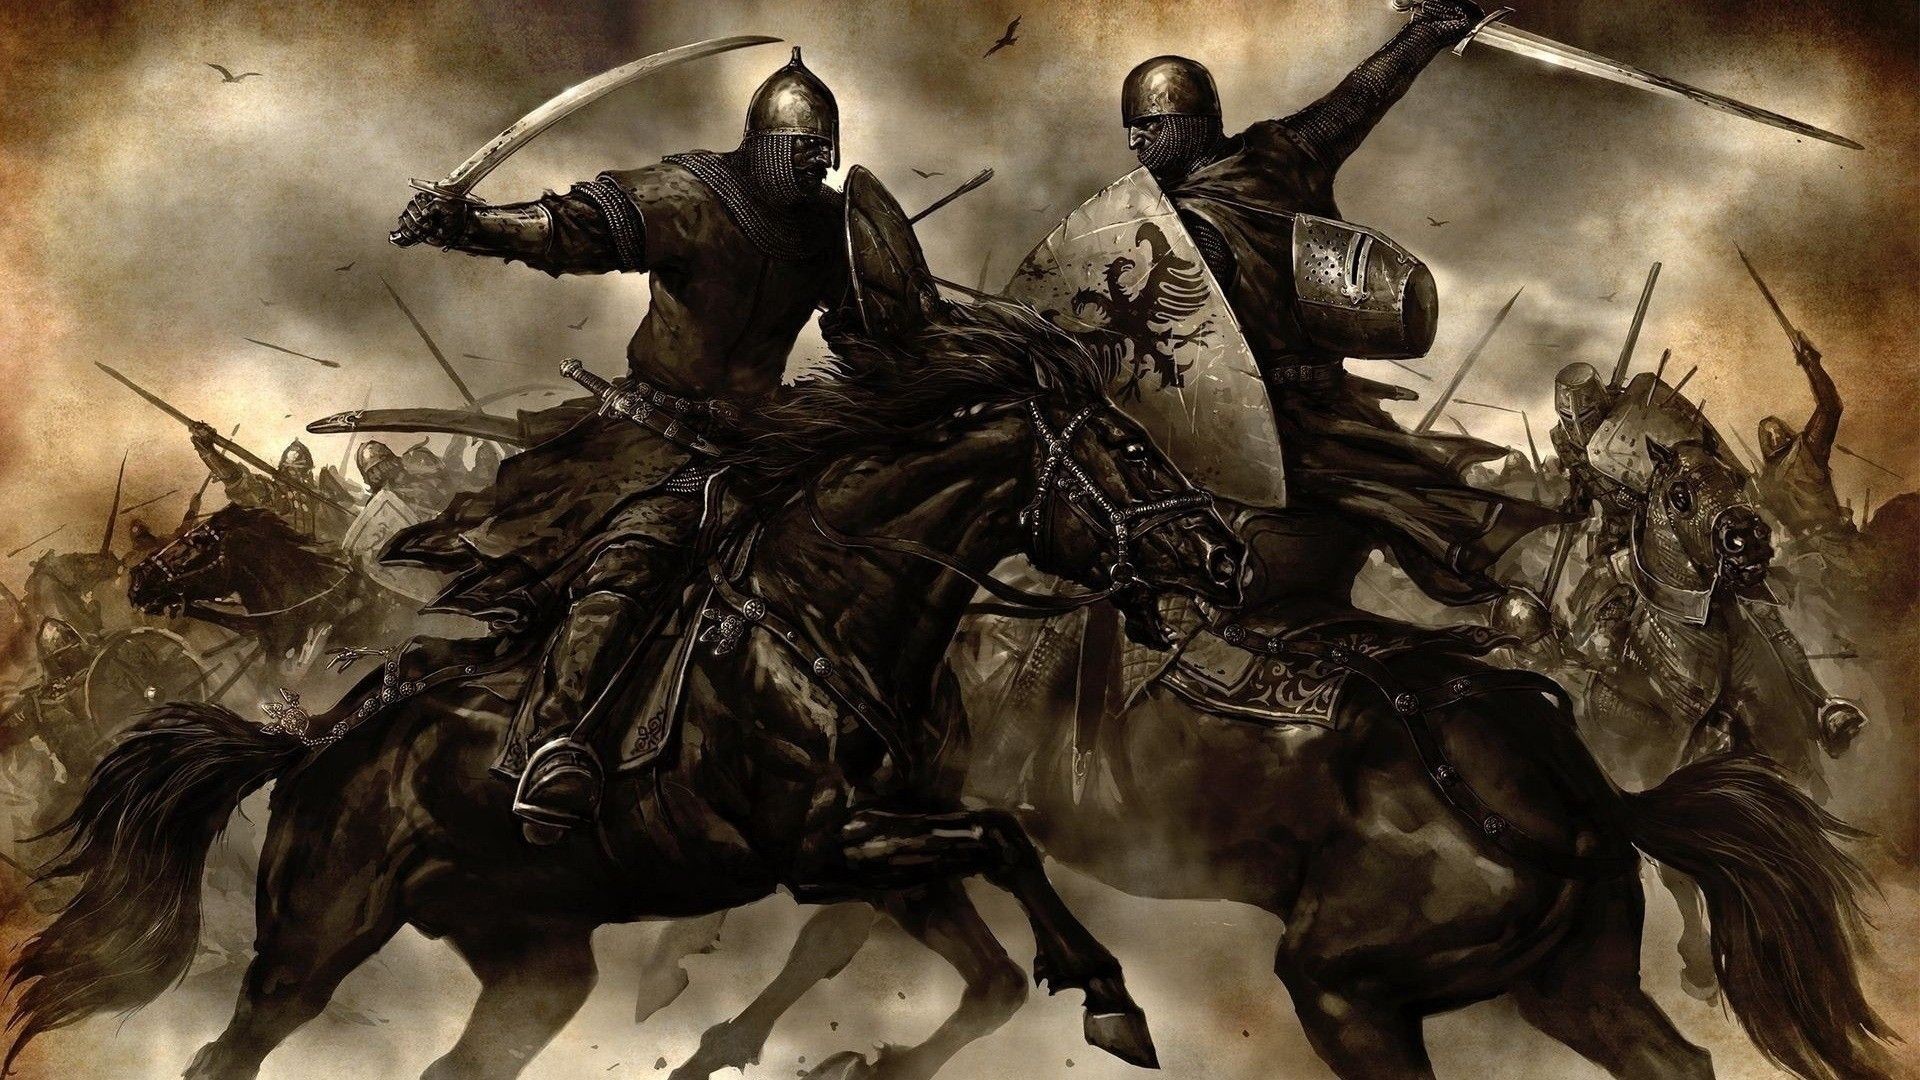 1920x1080 Knights Templar Wallpaper Background (59+ images)